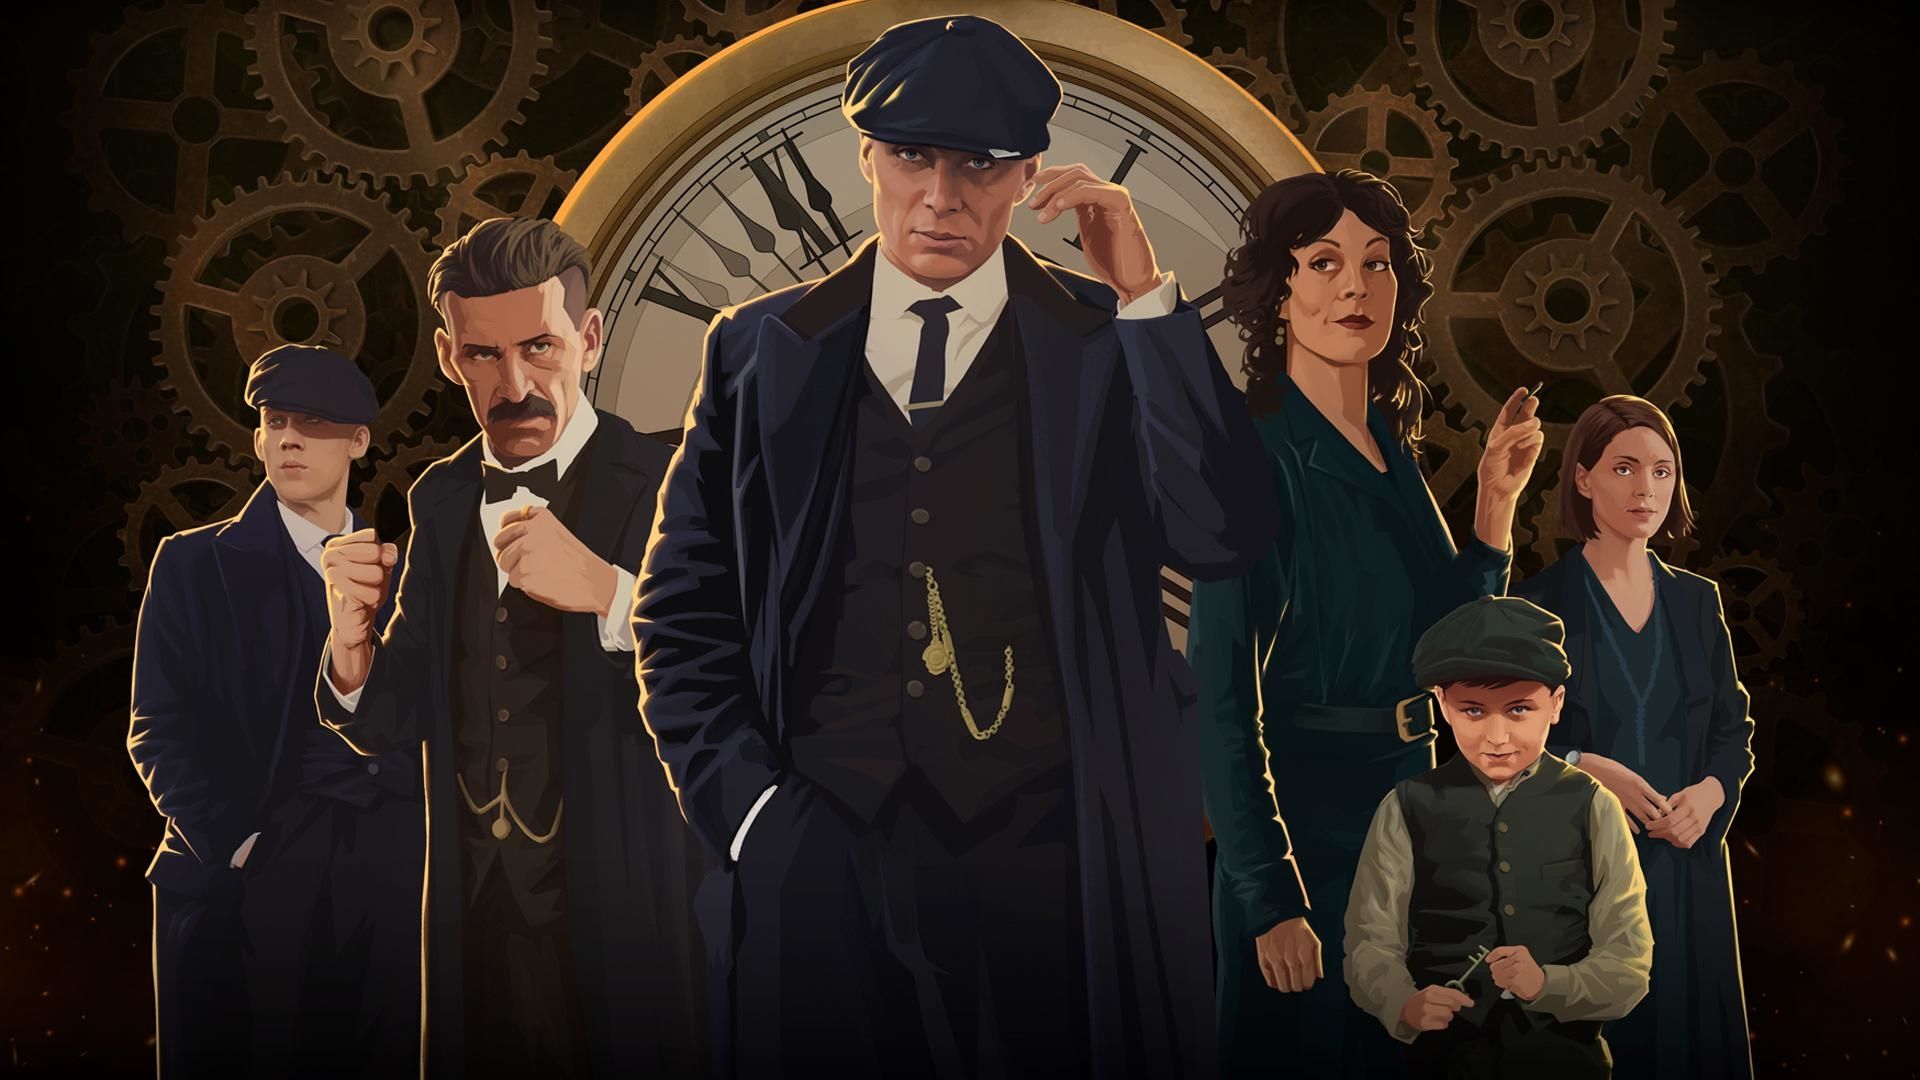 3840x2160 Peaky Blinders Game 4K Wallpaper, HD Games 4K Wallpapers, Image, Photos and Backgrounds